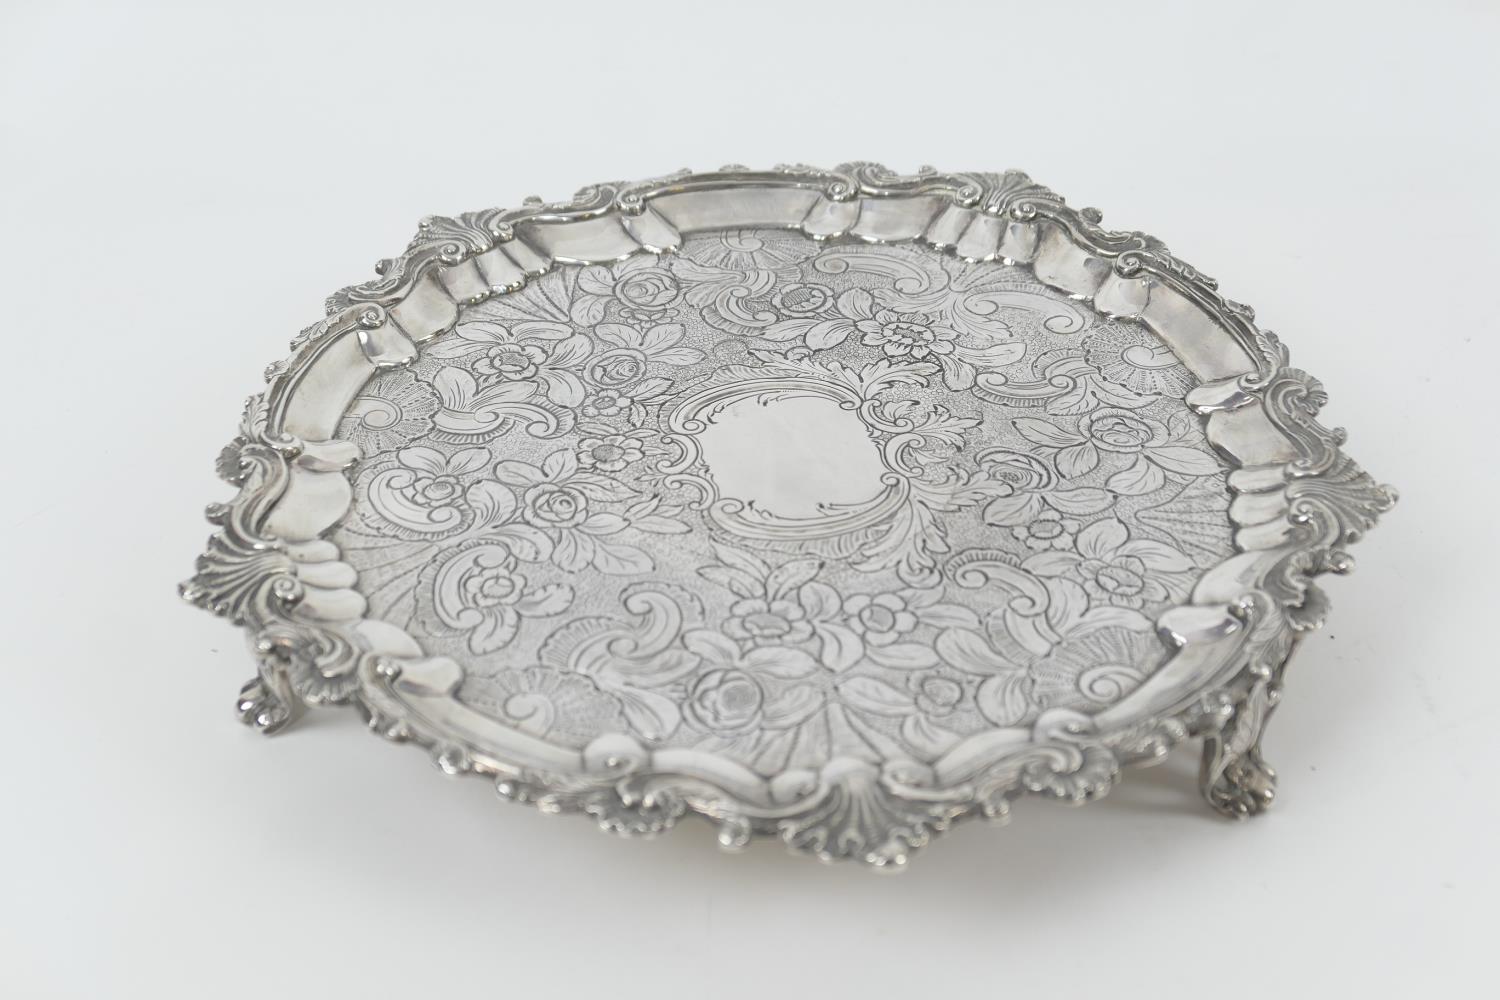 George III silver salver, maker possibly Thomas Howell, London 1791, circular form with raised